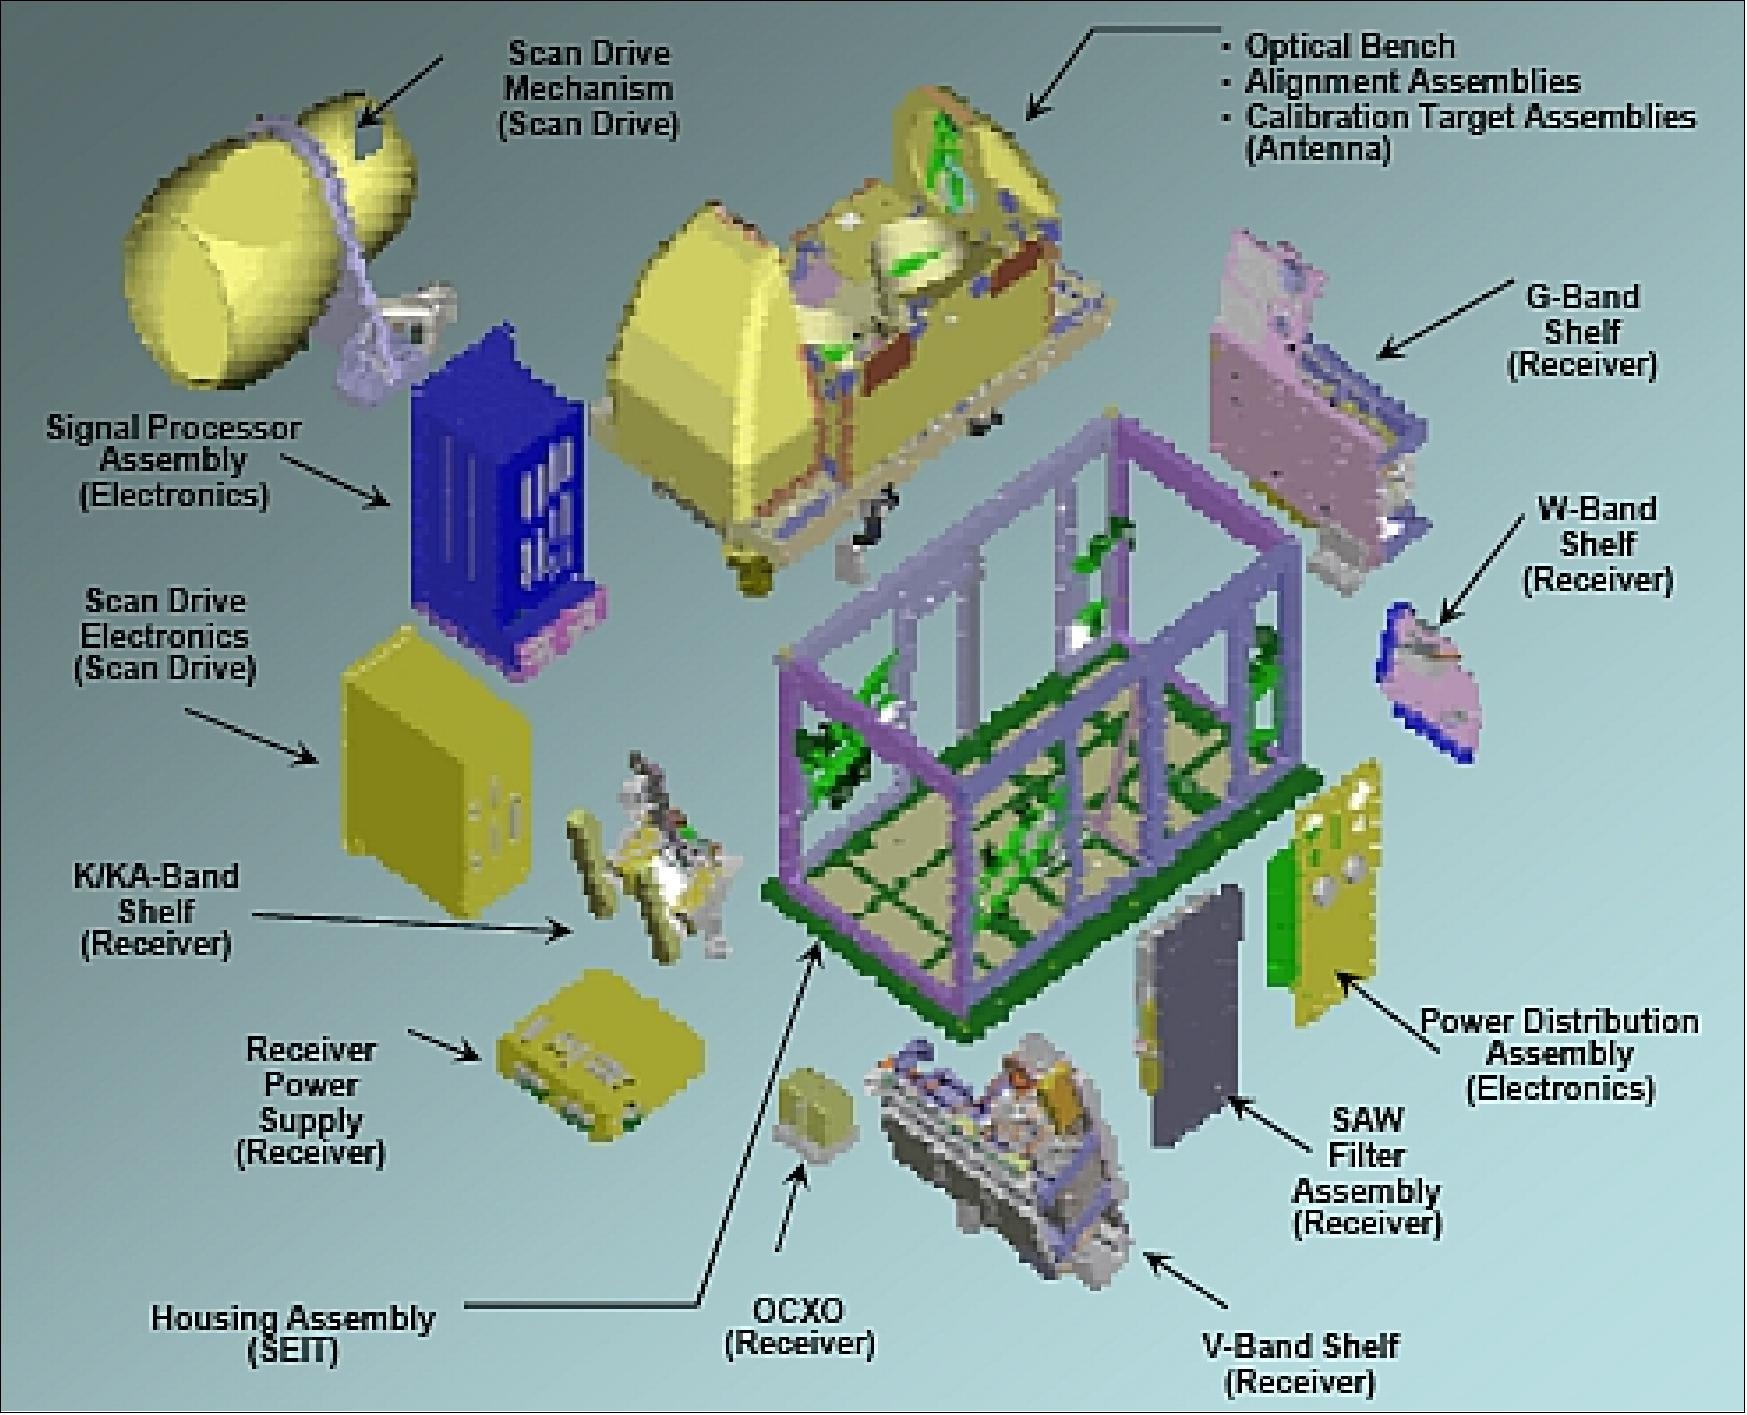 Figure 60: Elements of the ATMS design configuration (image credit: NASA)